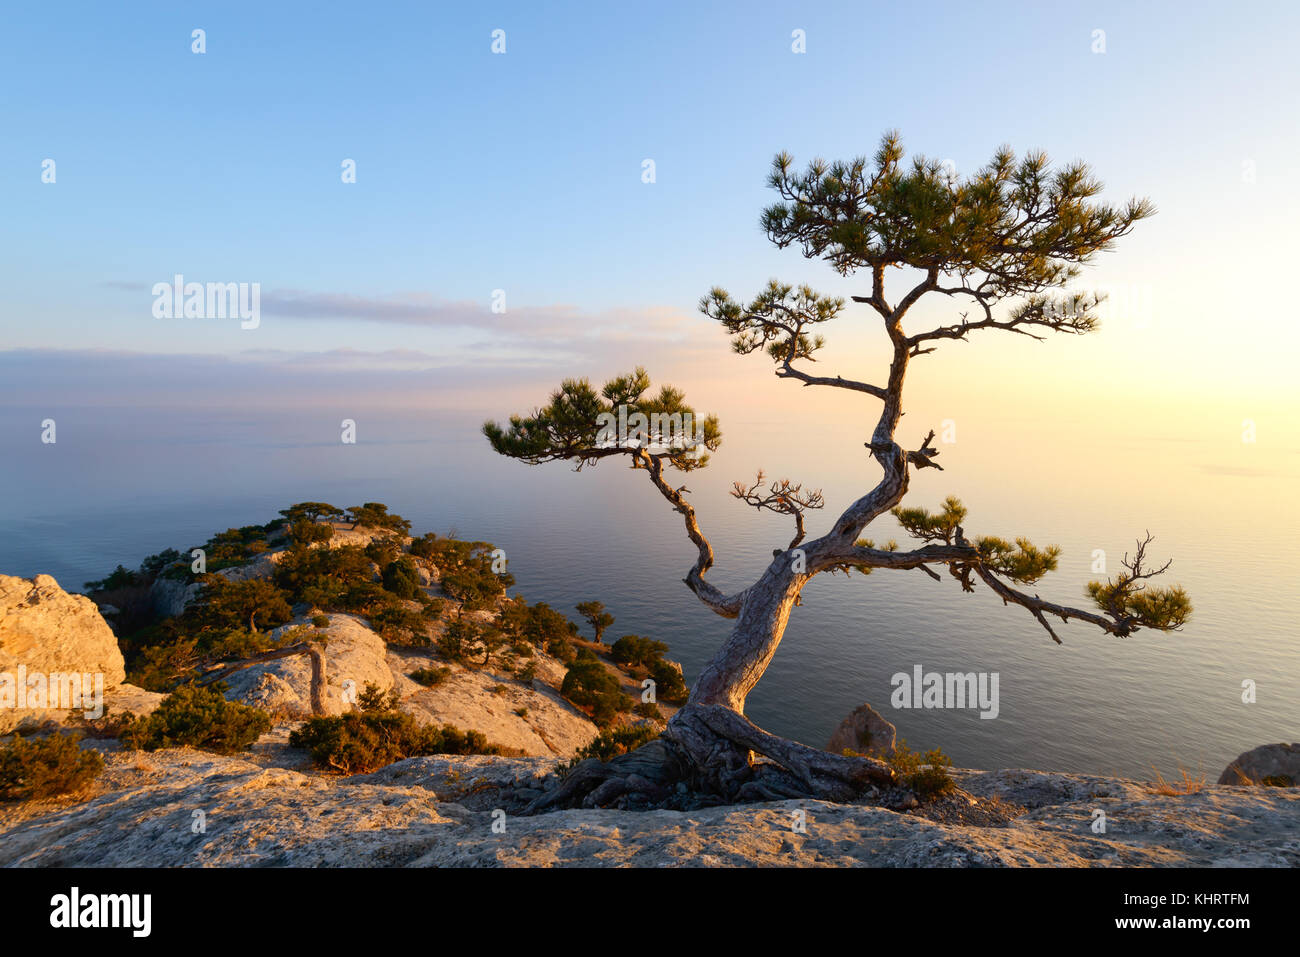 Alone tree on the edge of the cliff Stock Photo